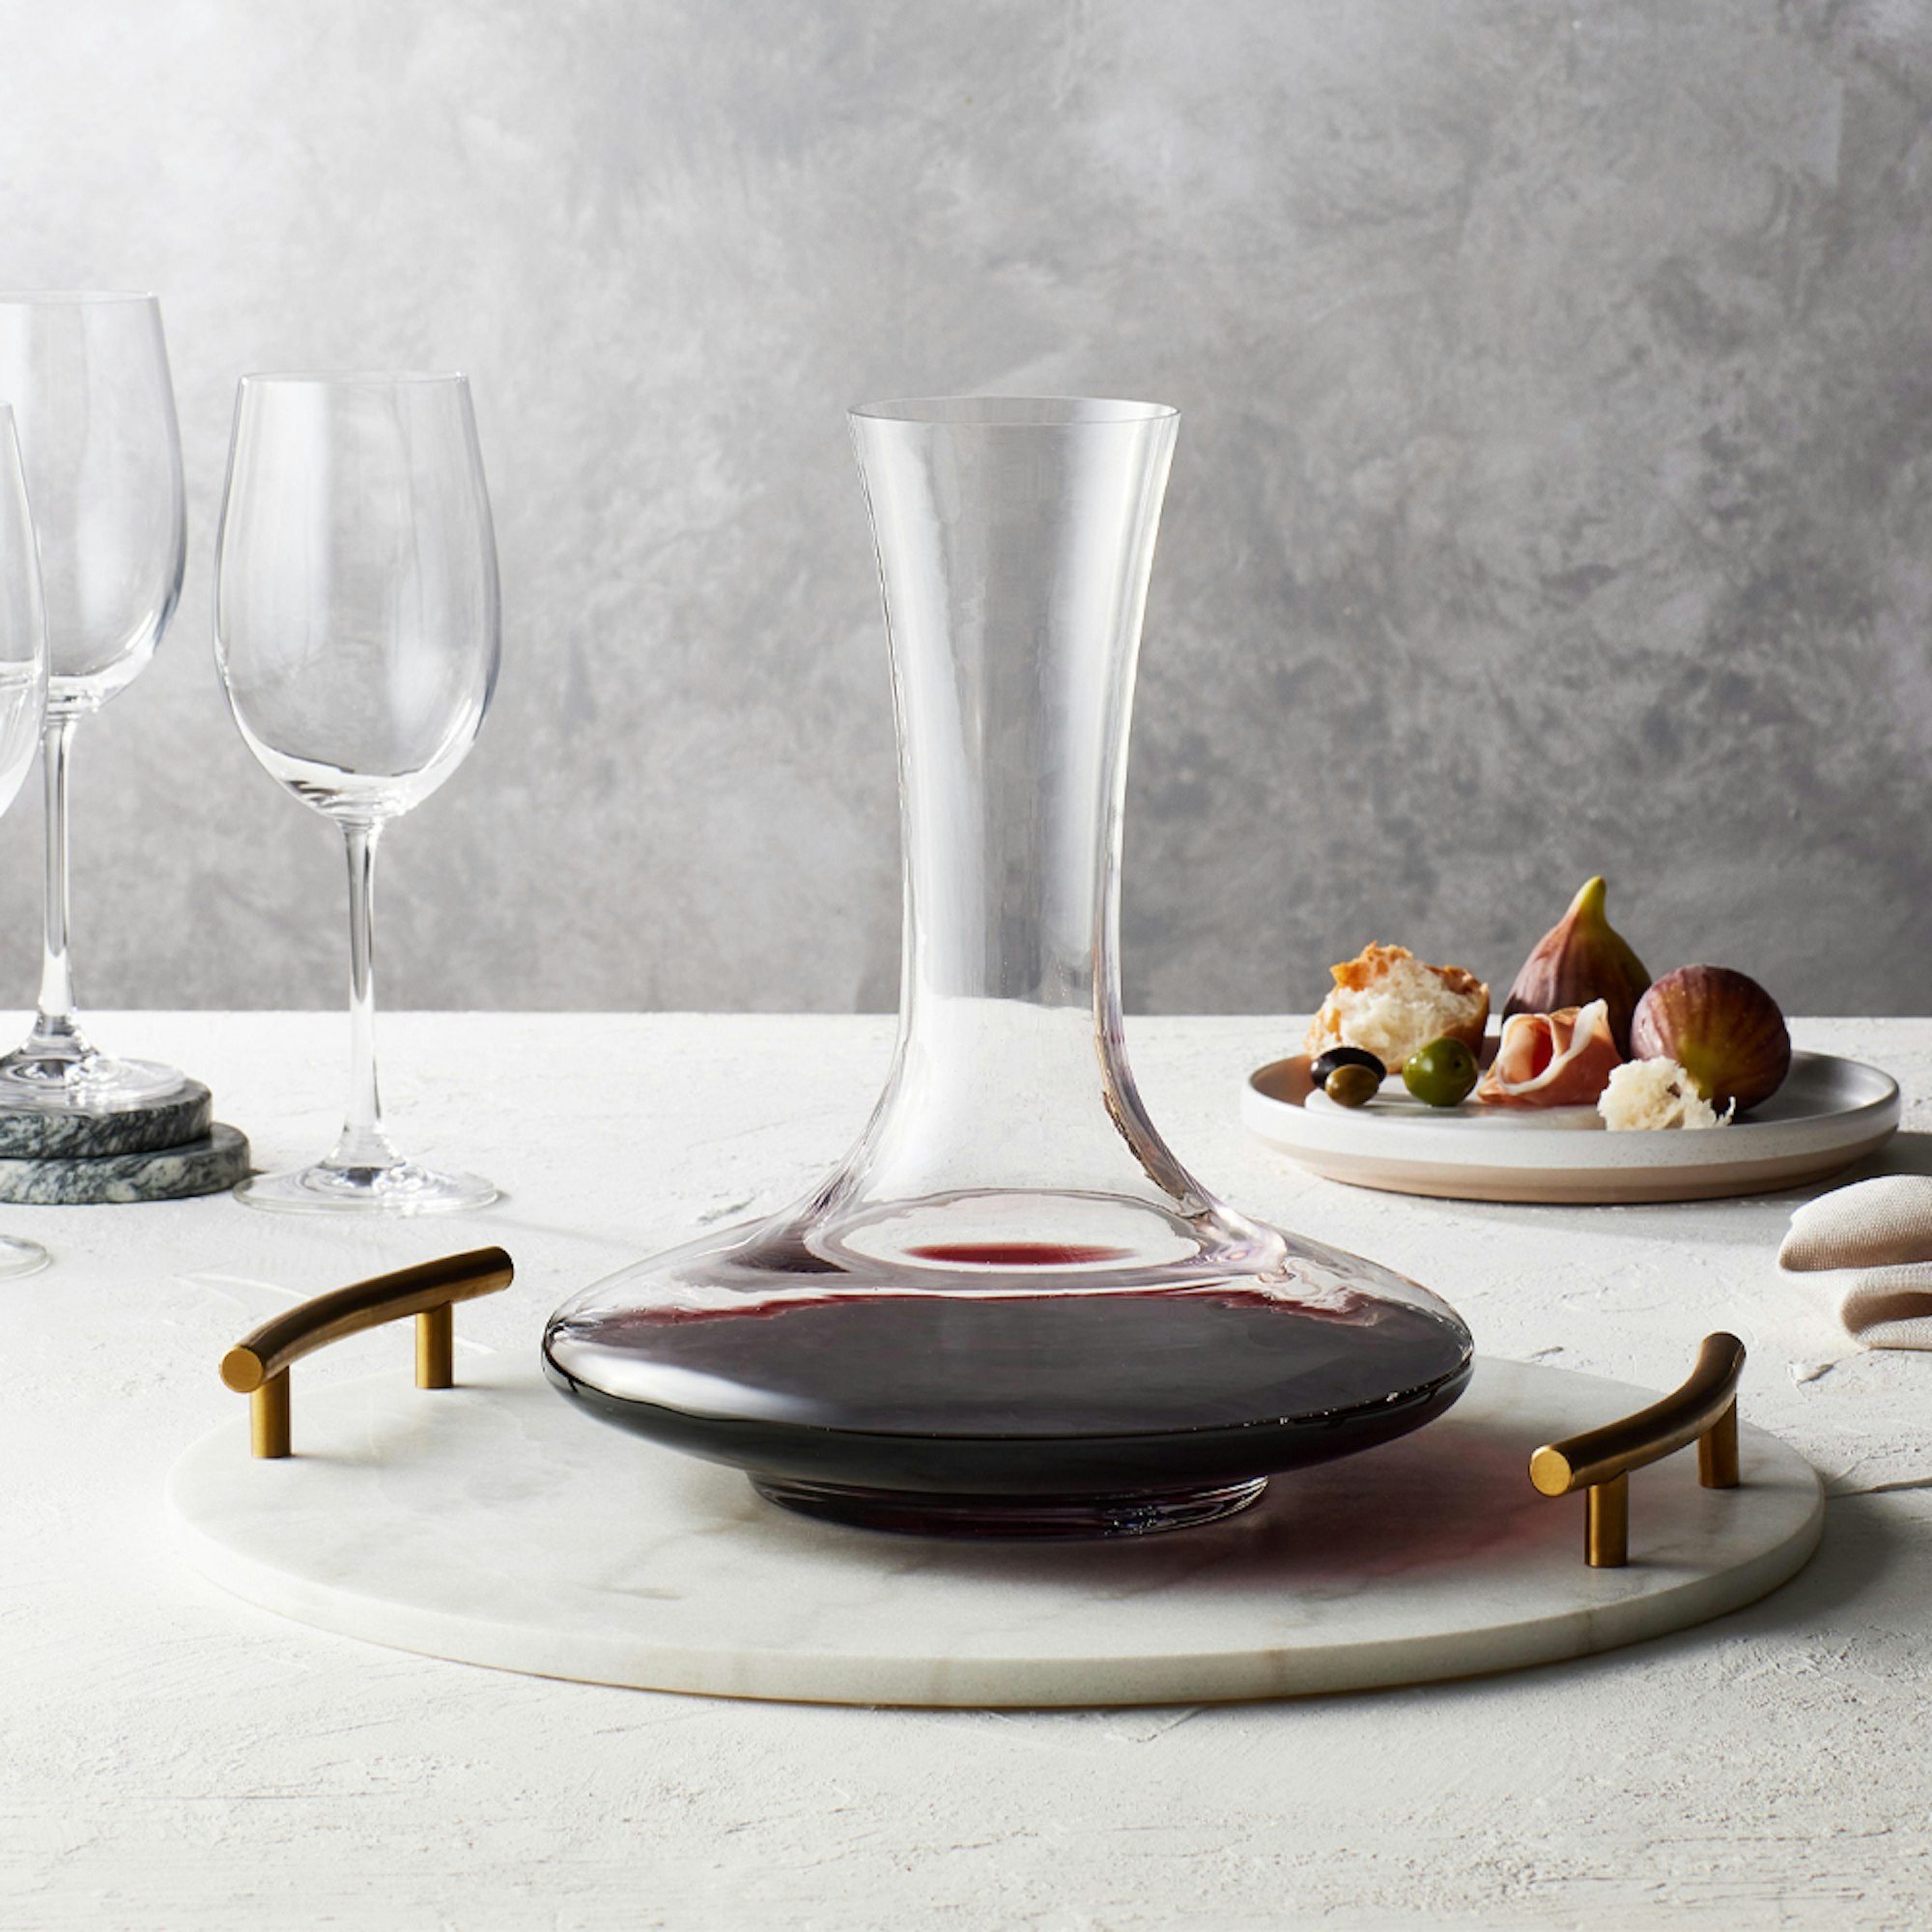 Decanter filled with red wine on a marble board with wine glasses and fruit